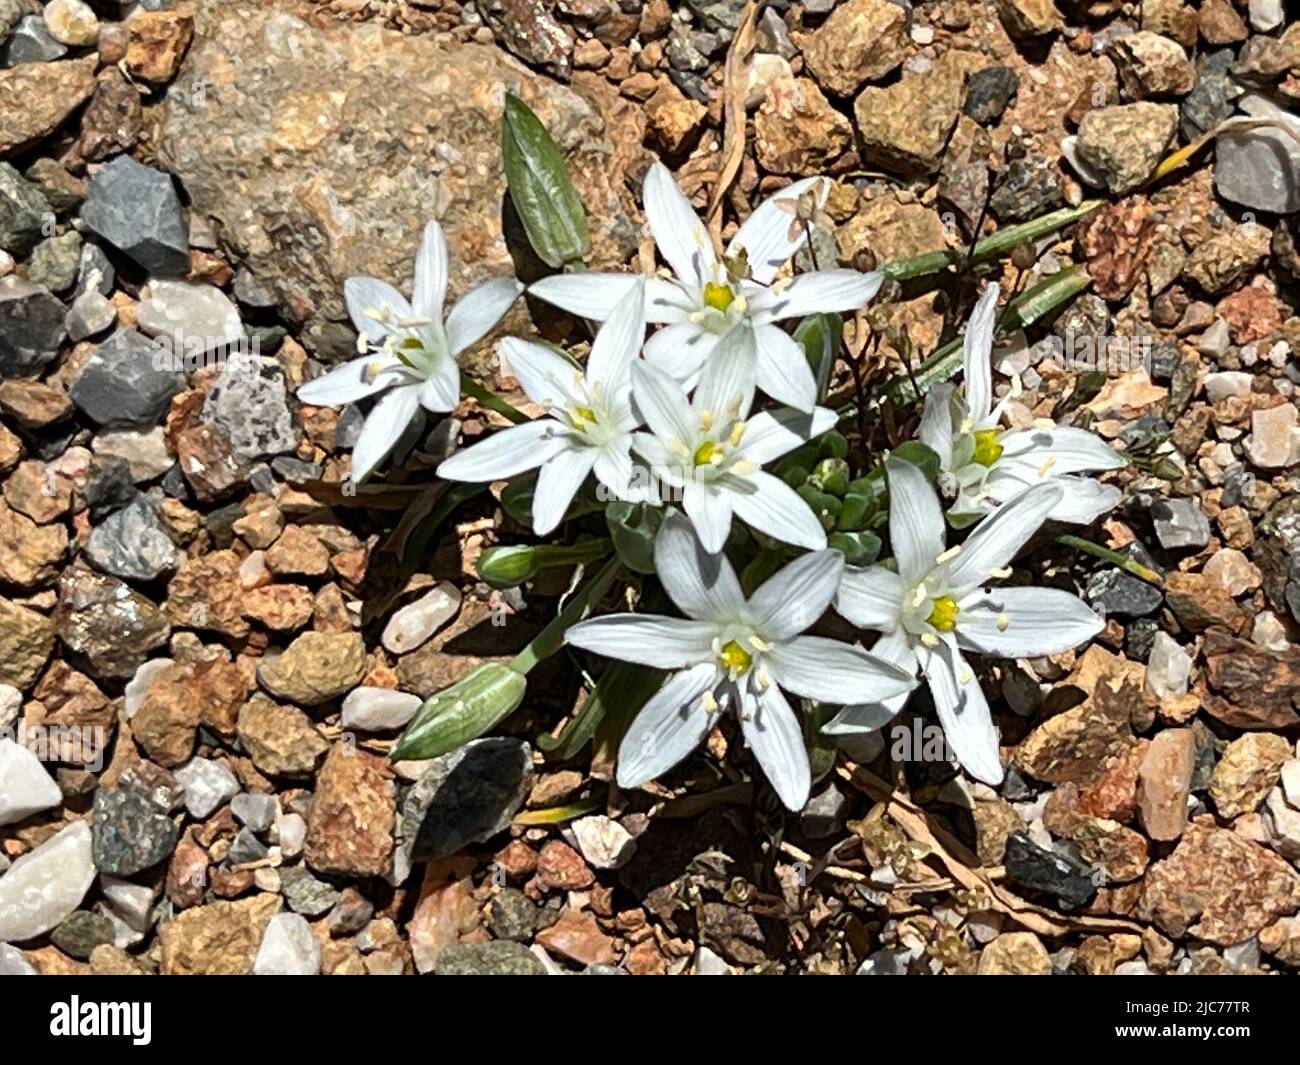 garden star-of-Bethlehem, grass lily, nap-at-noon, or eleven-o'clock lady - Ornithogalum umbellatum - Dolden-Milchstern - ornithogale en ombelle, dame Stock Photo